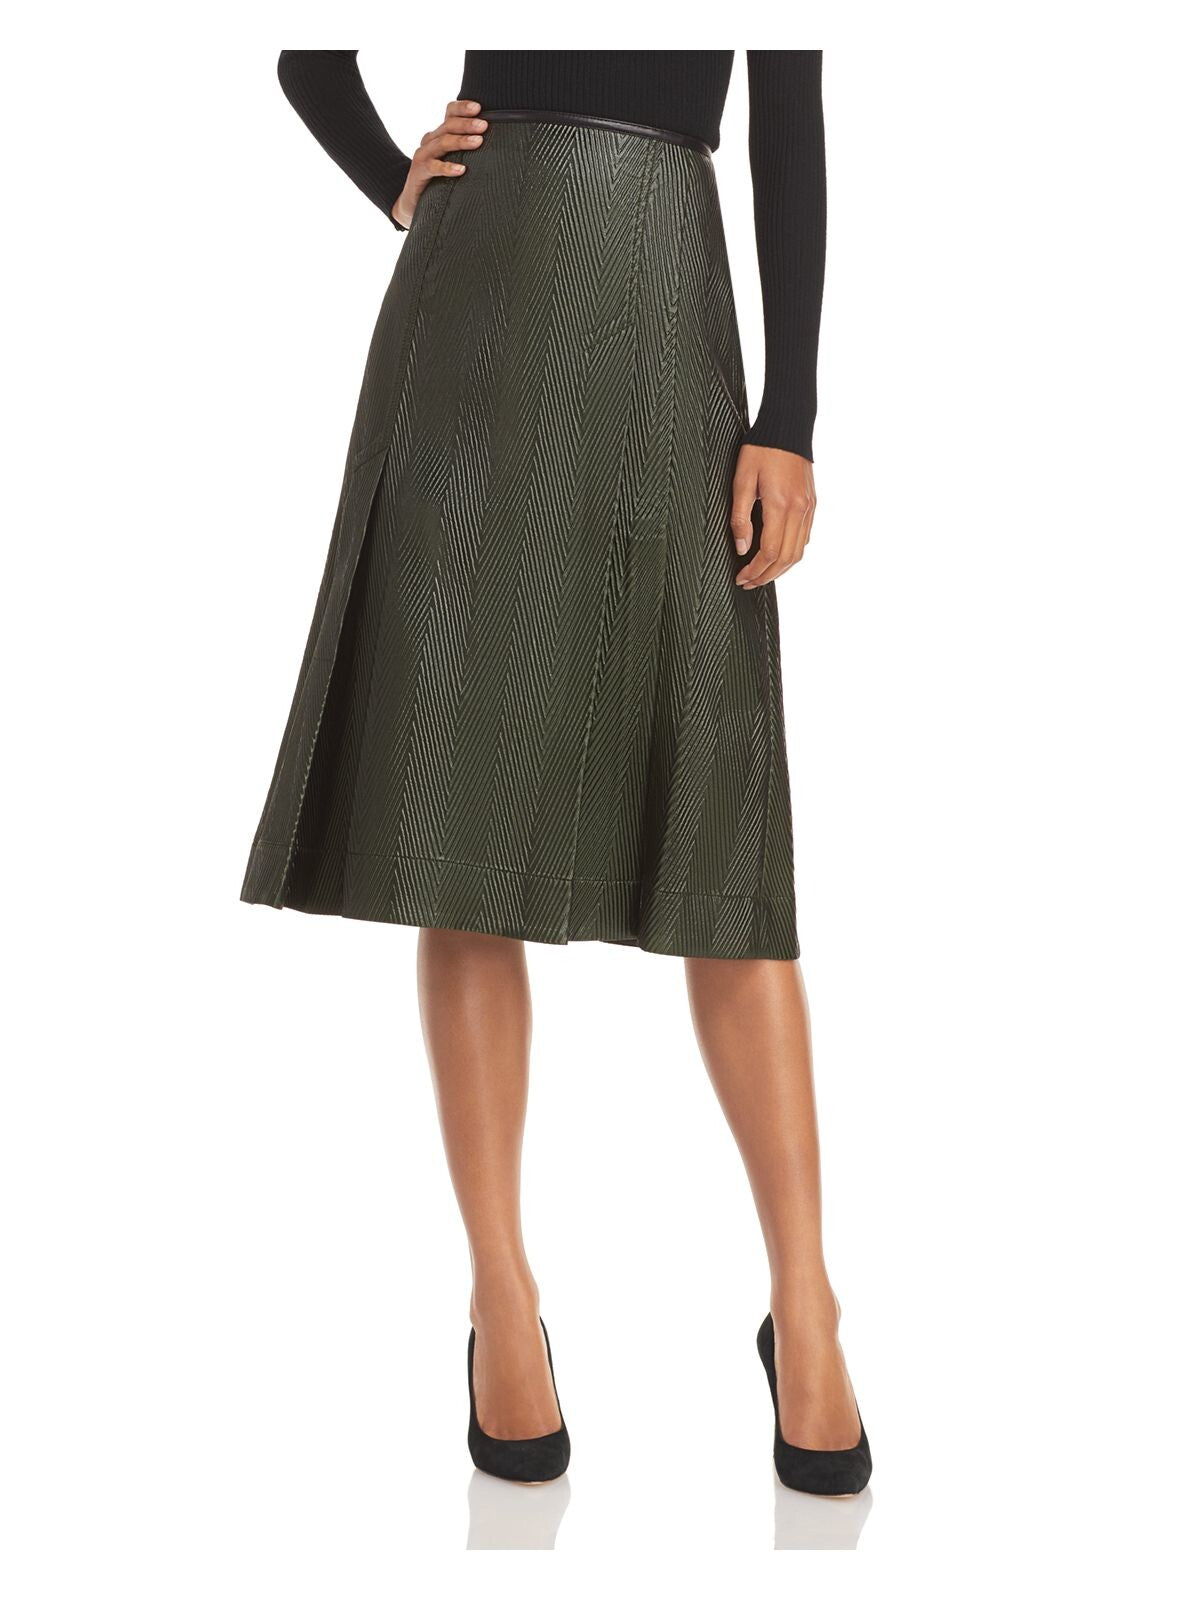 3.1 PHILLIP LIM Womens Green Pleated Below The Knee Wear To Work A-Line Skirt 2